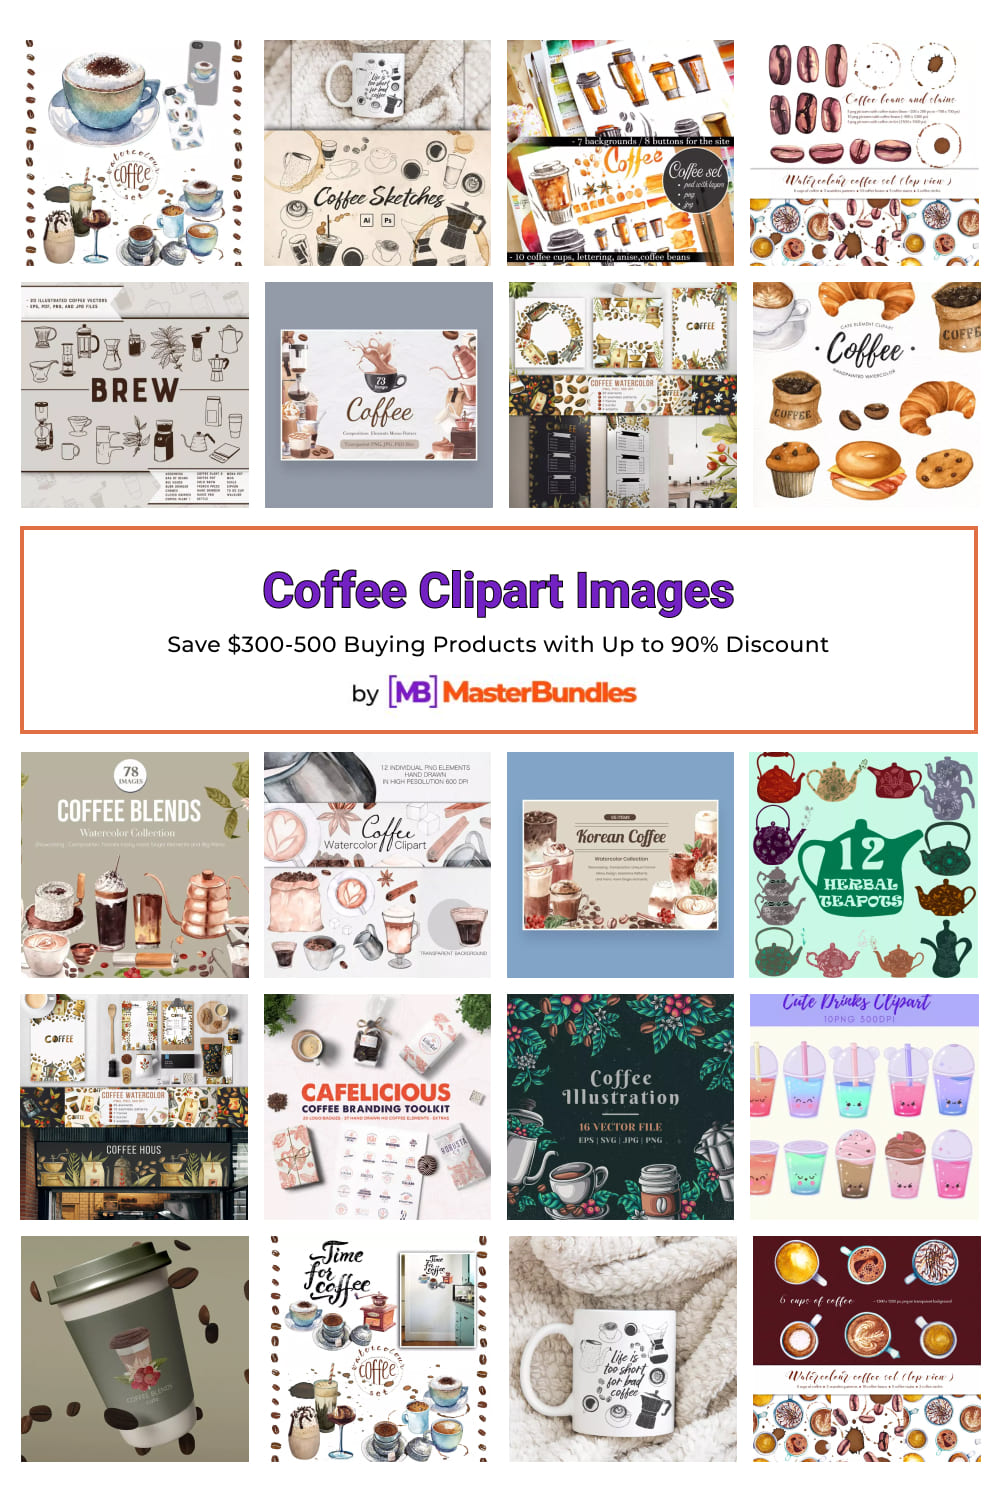 Coffee Clipart Images Pinterest image.